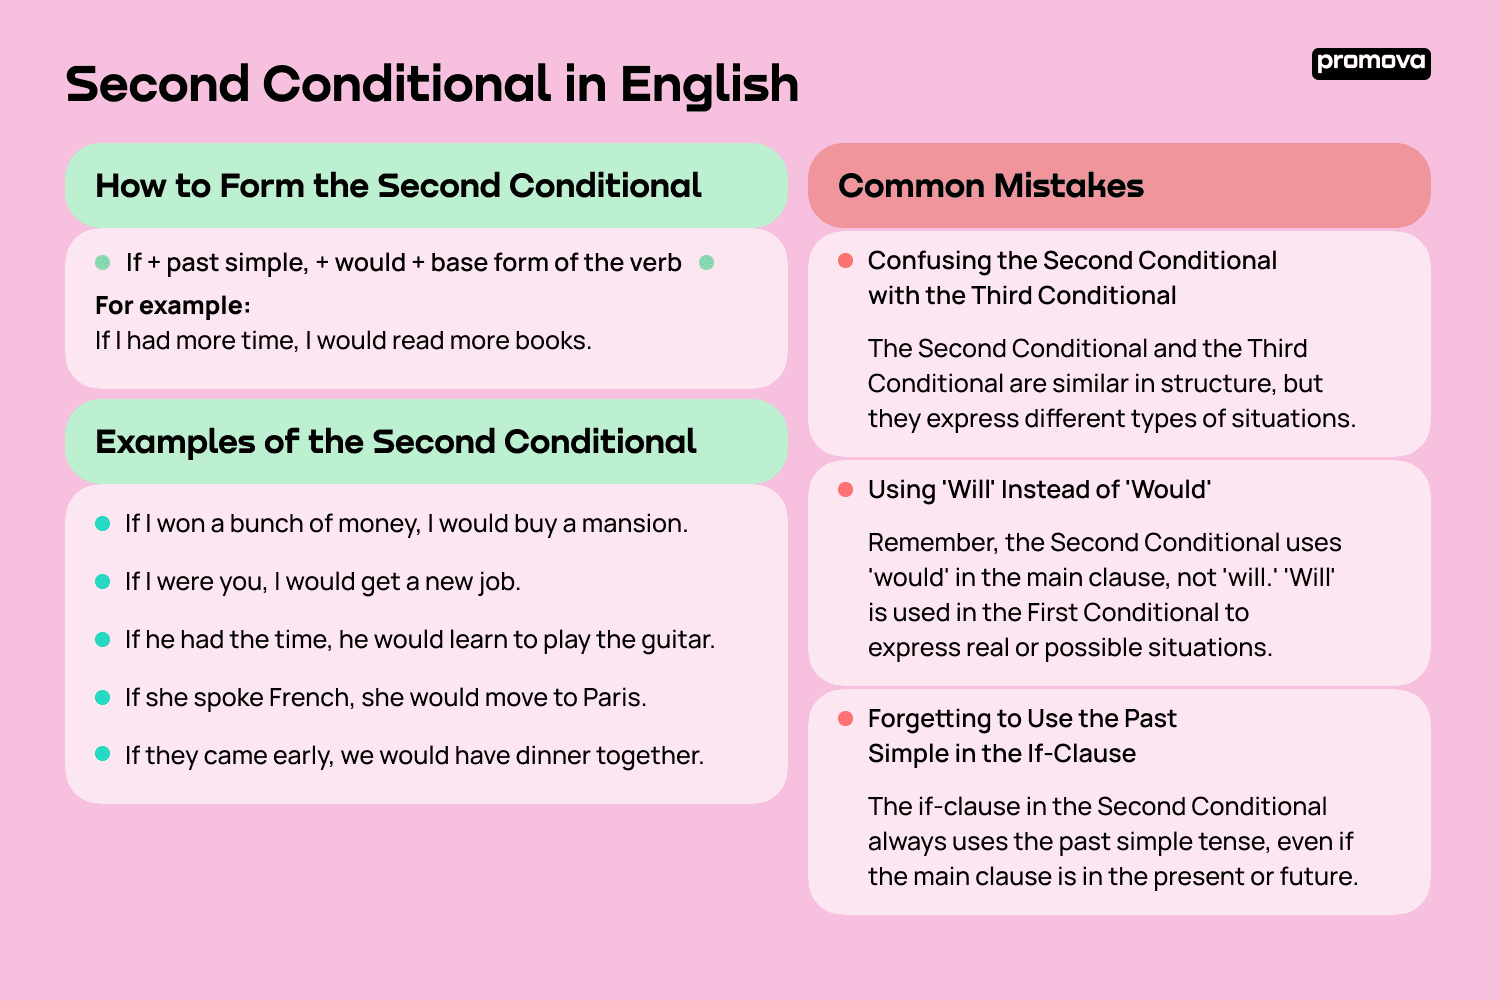 109_Second Conditional in English.png